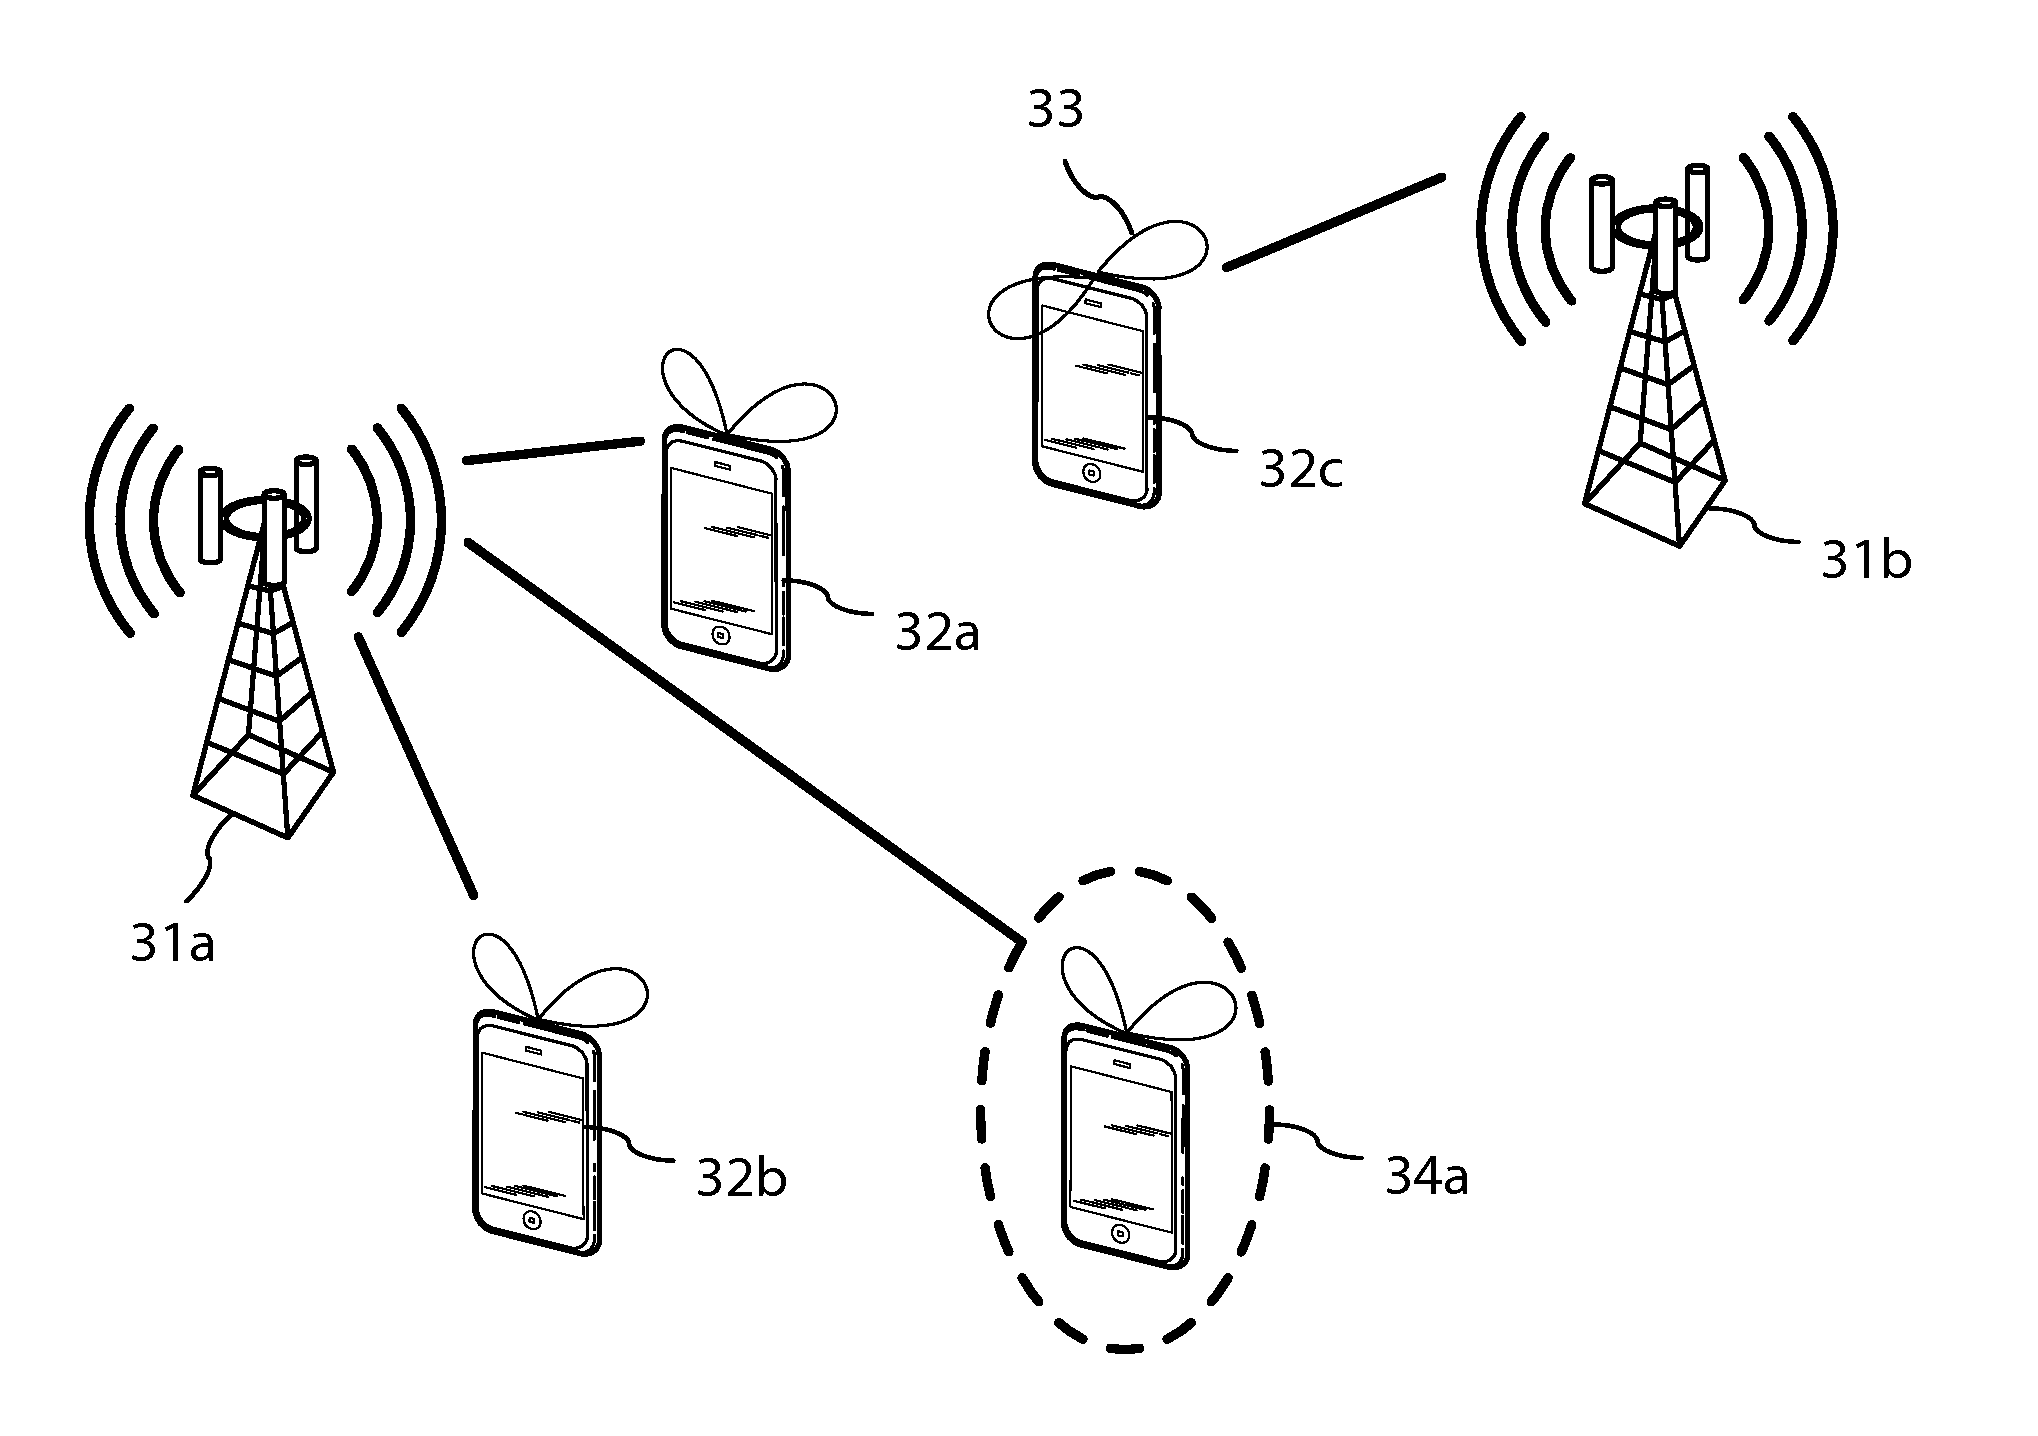 Power management & control synchronization within in a wireless network using modal antennas and related methods